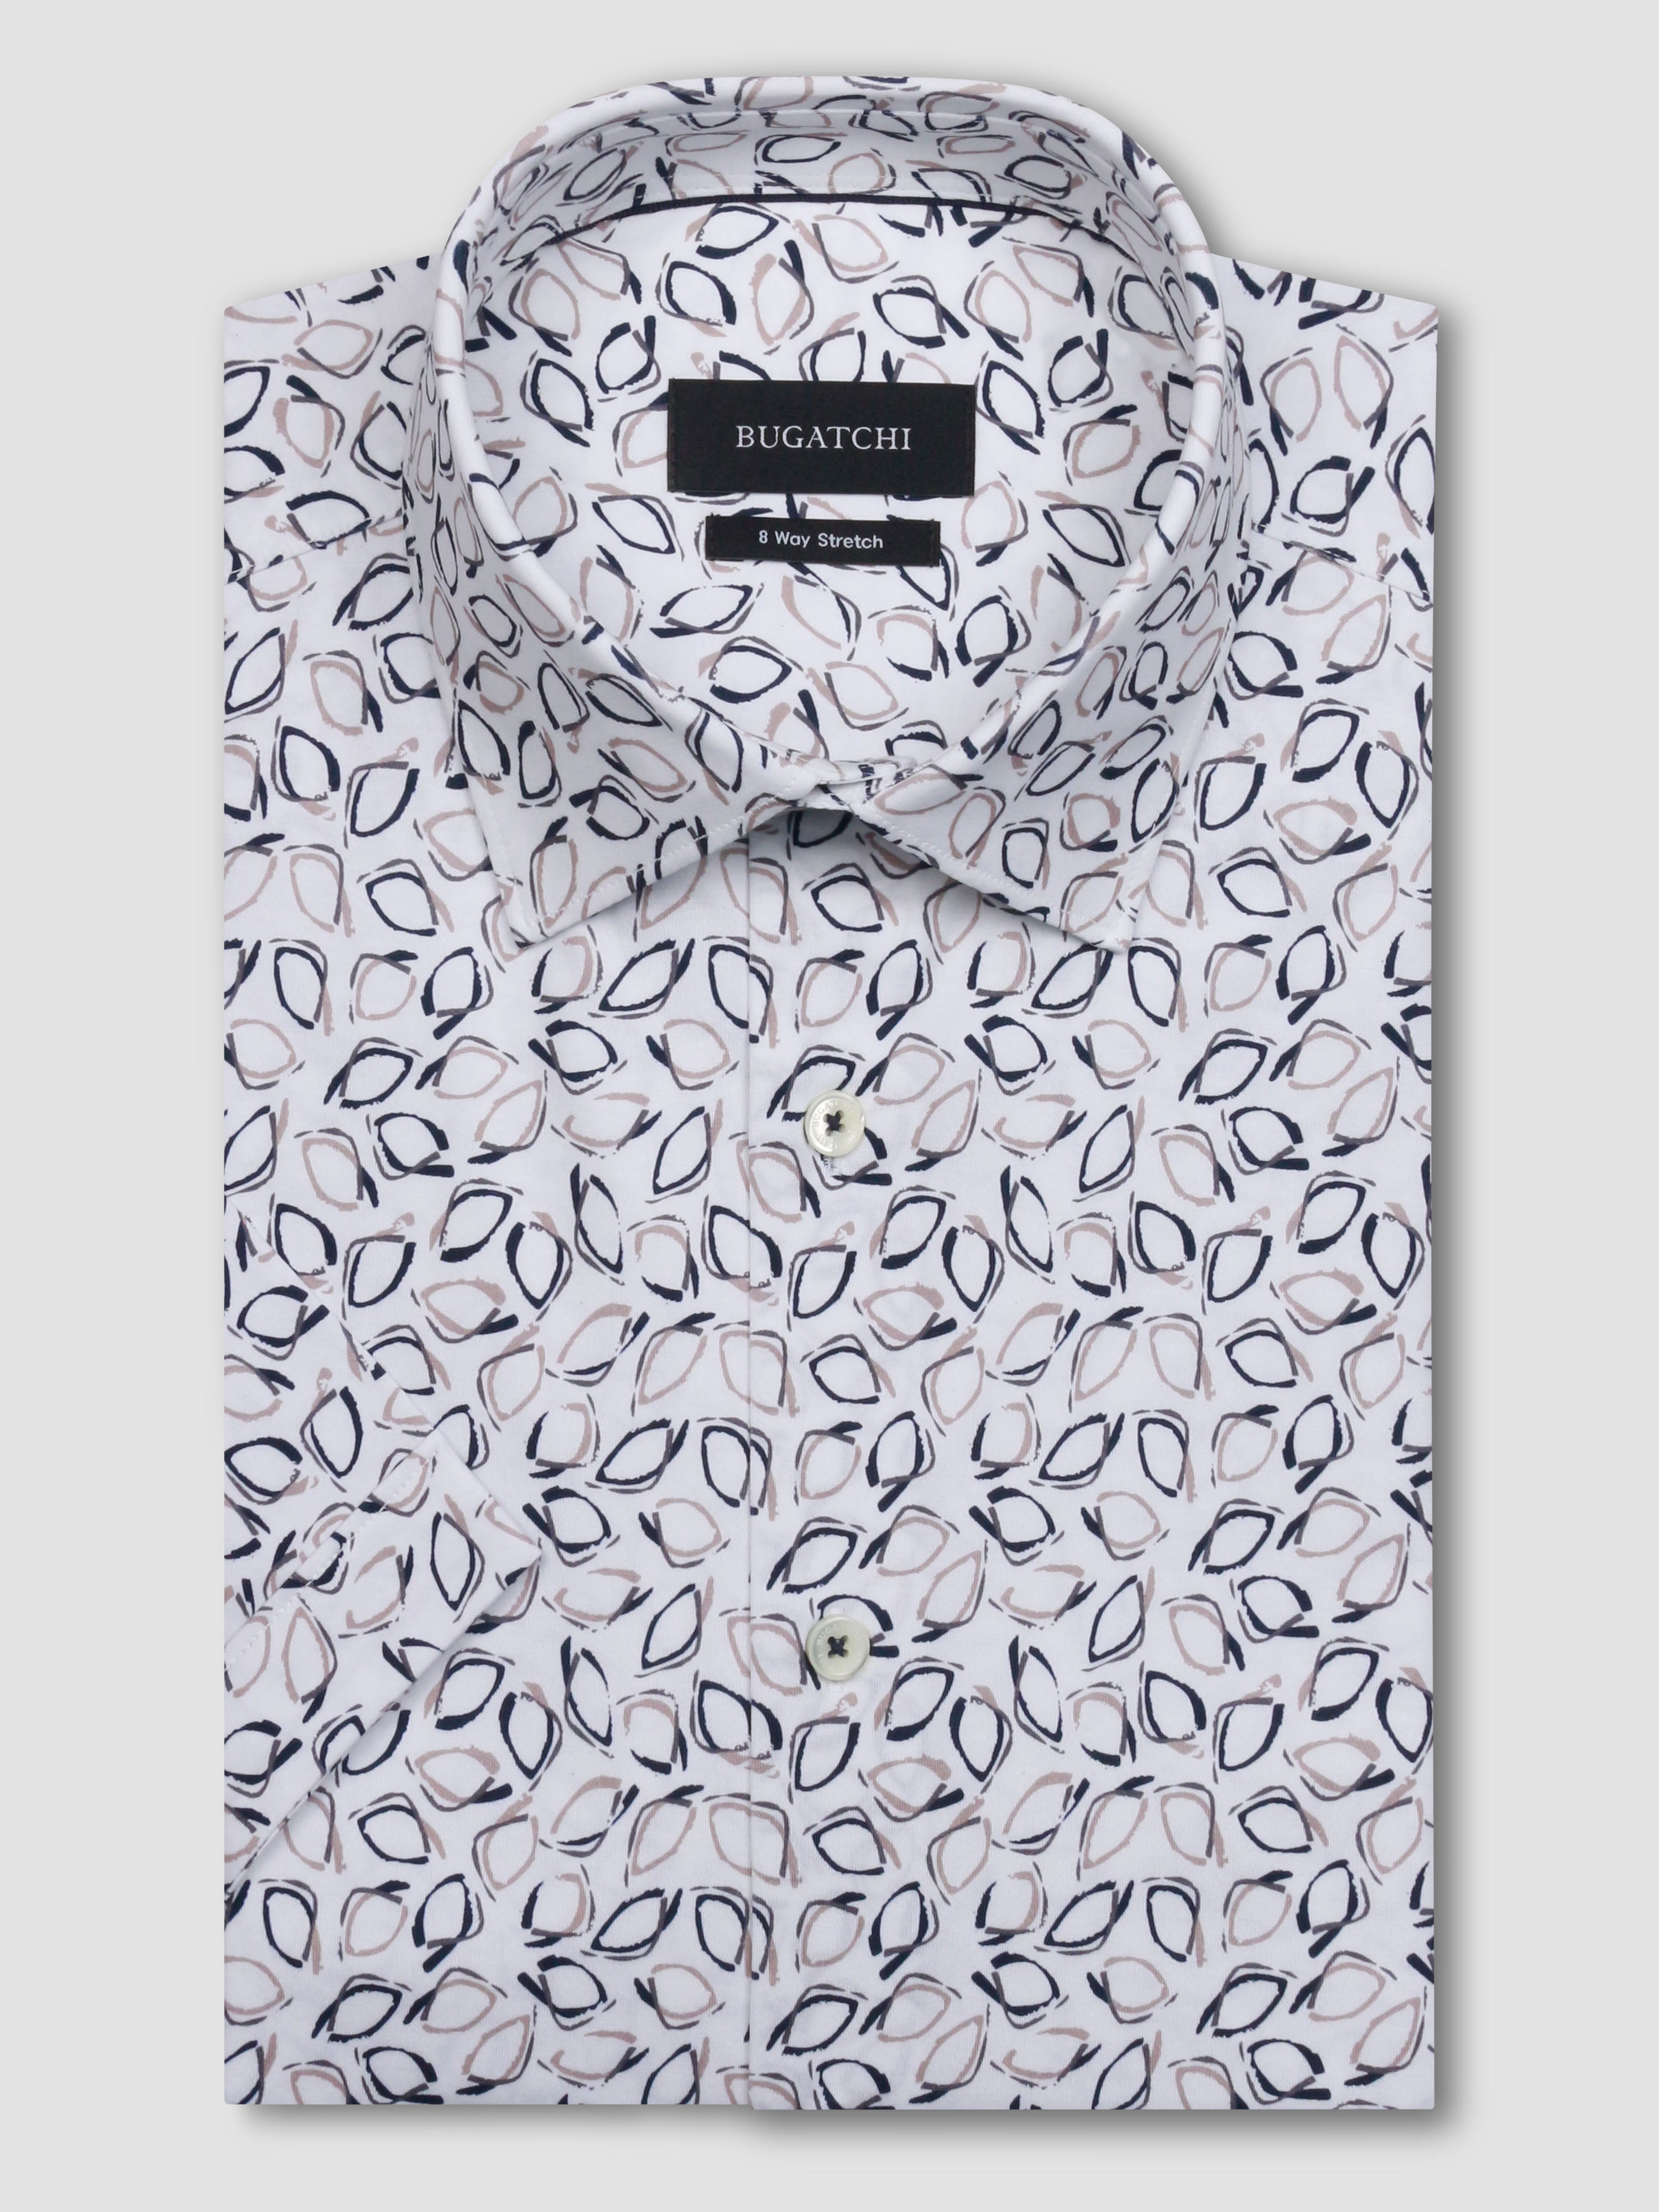 Miles short-sleeved shirt in leaf print OoohCotton with point collar, genuine shell buttons and curved hem. OoohCotton is a double mercerized, wrinkle resistant, breathable, easy-care, 8-way stretch cotton blend with quick dry and thermal comfort features.